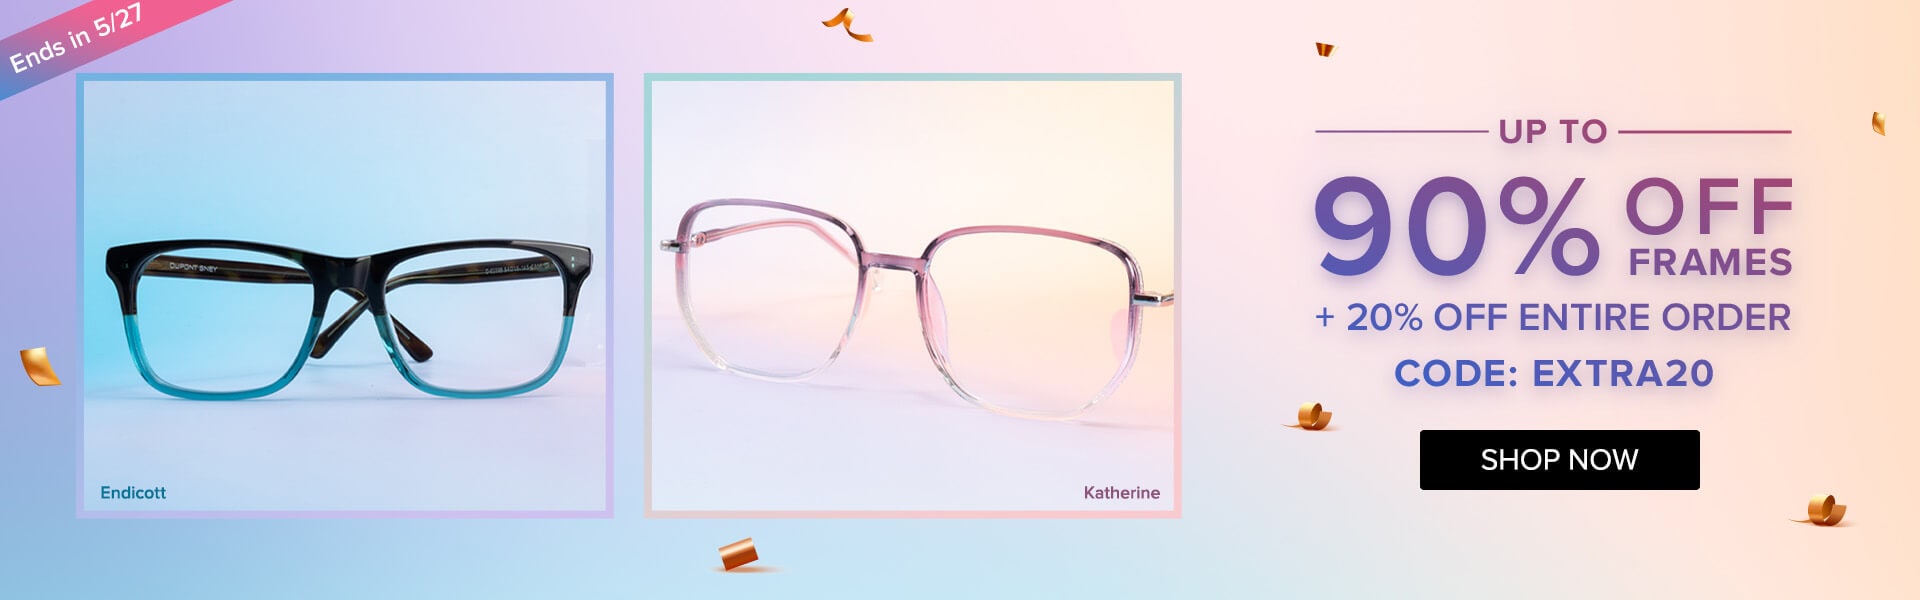 Up to 90% off frames + 20% off entire order